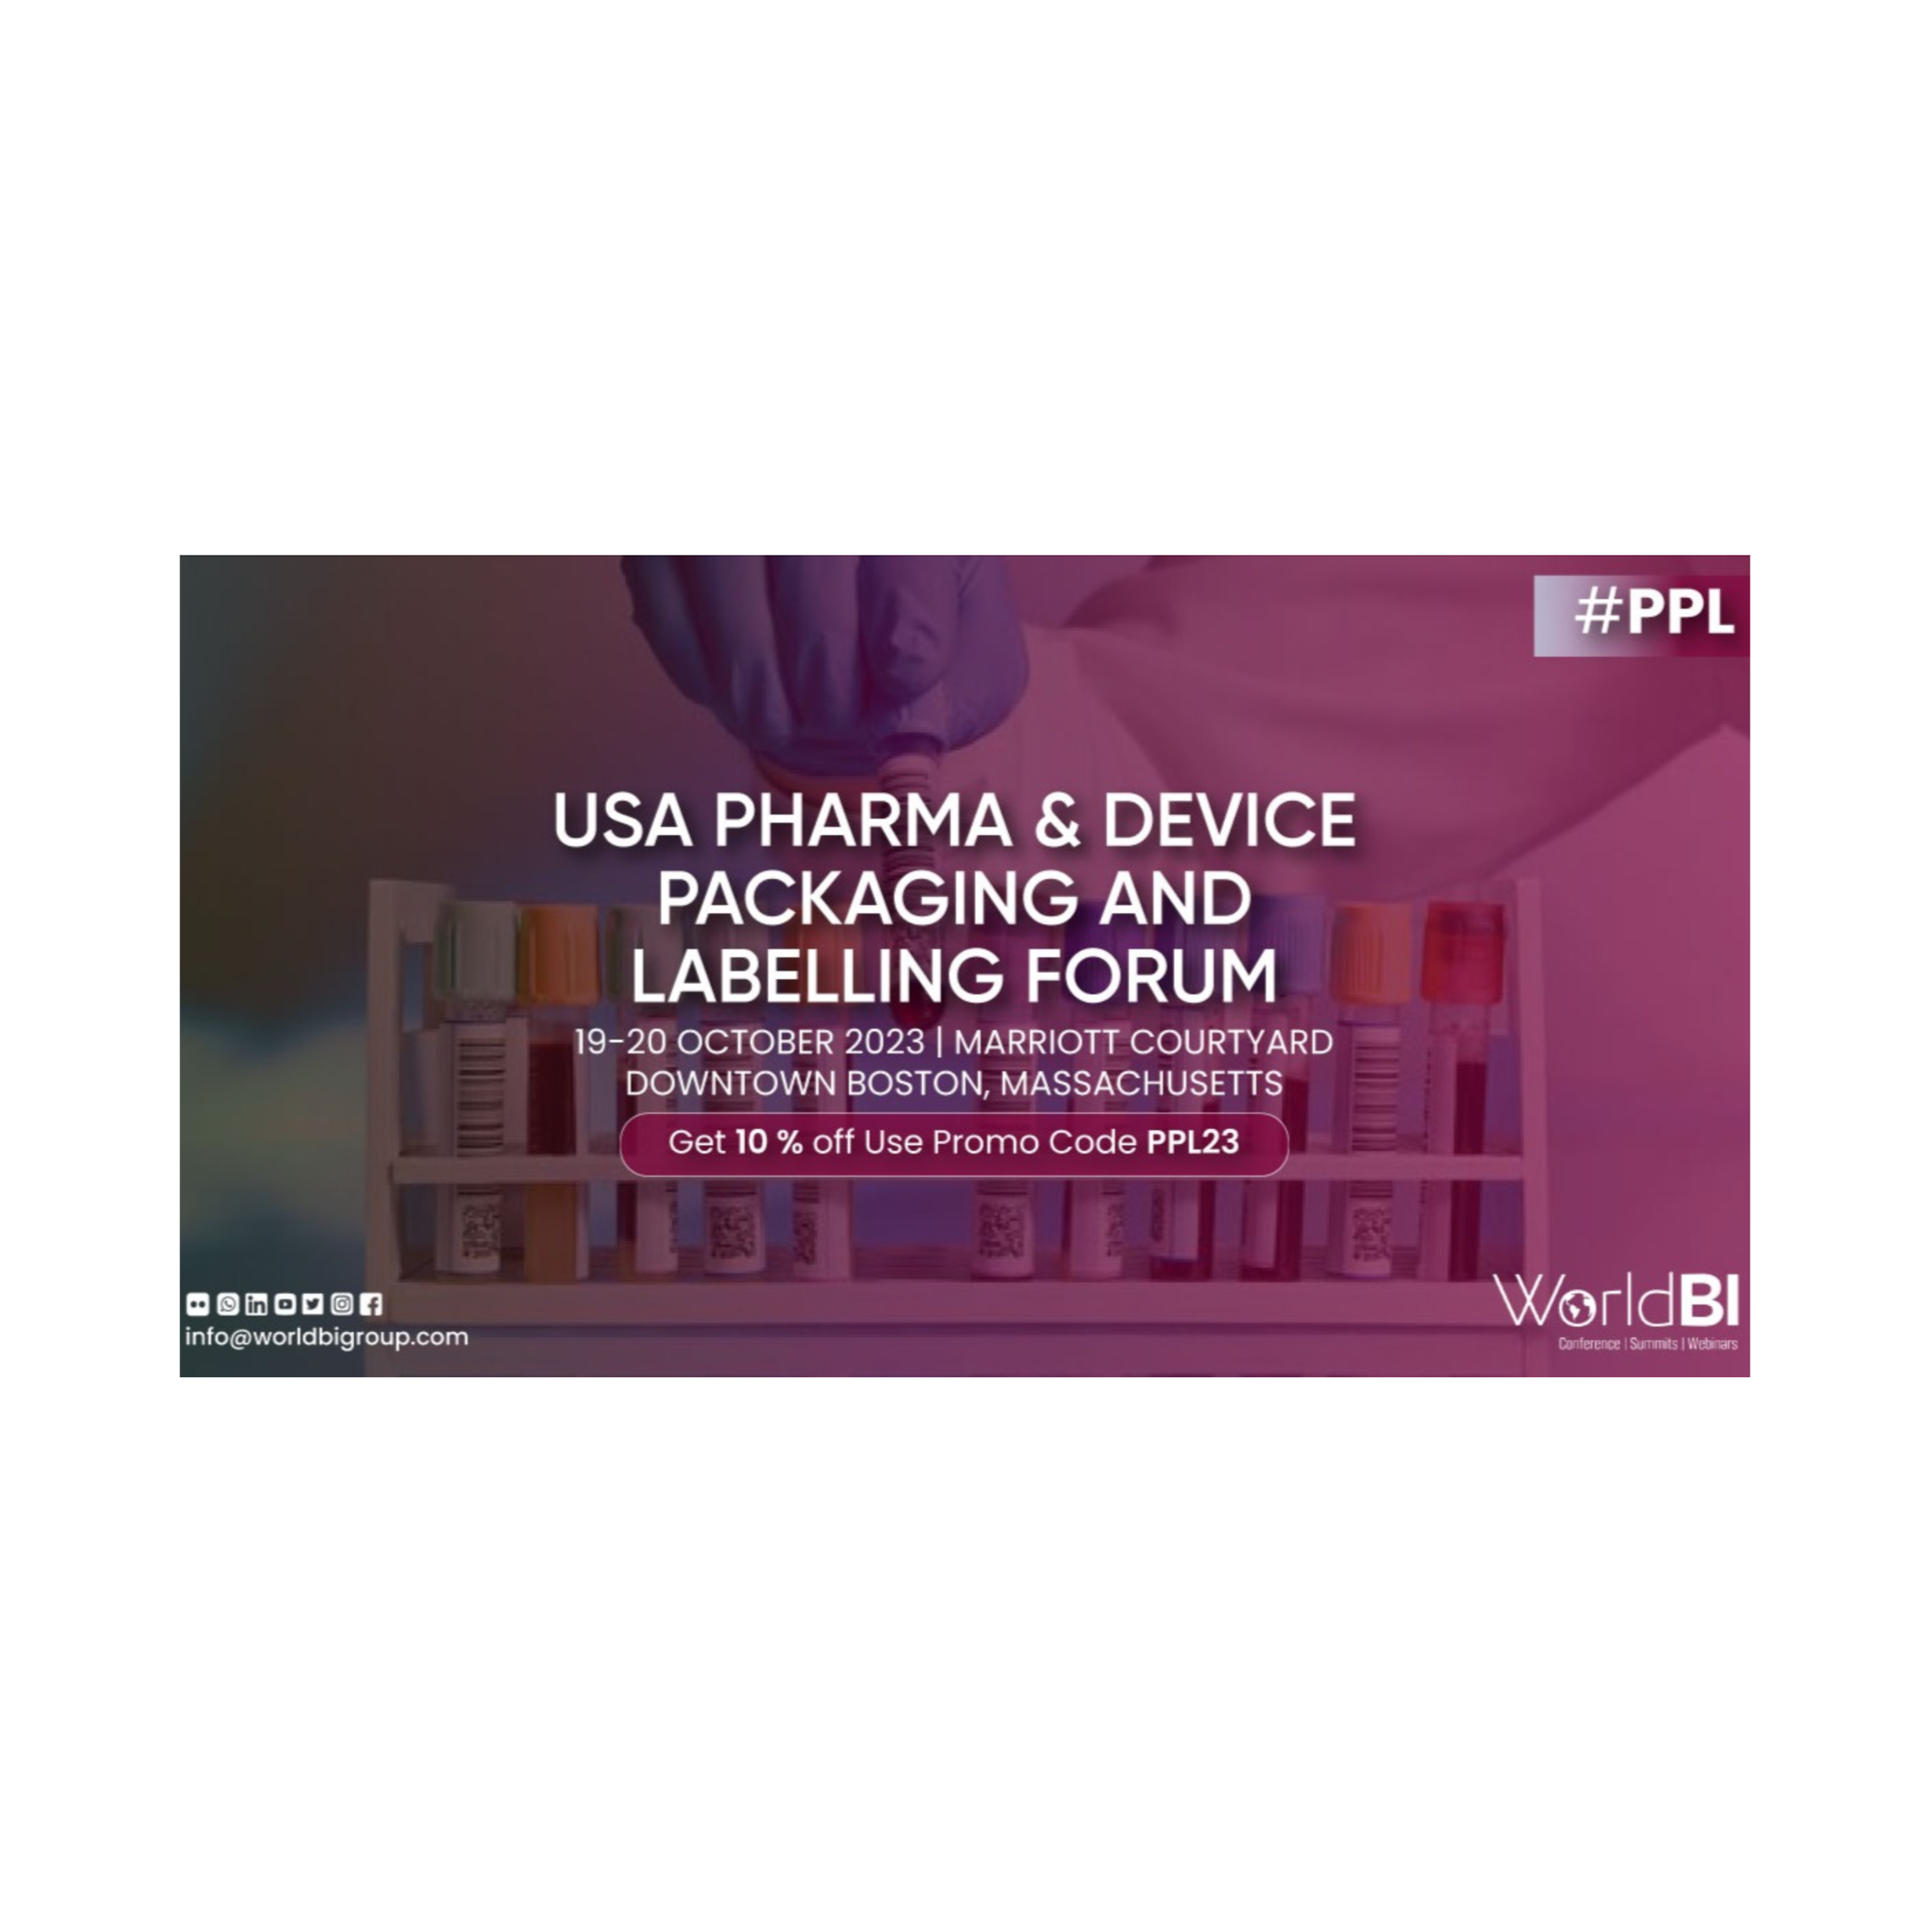 USA Pharma & Device Packaging and Labelling Forum 2023